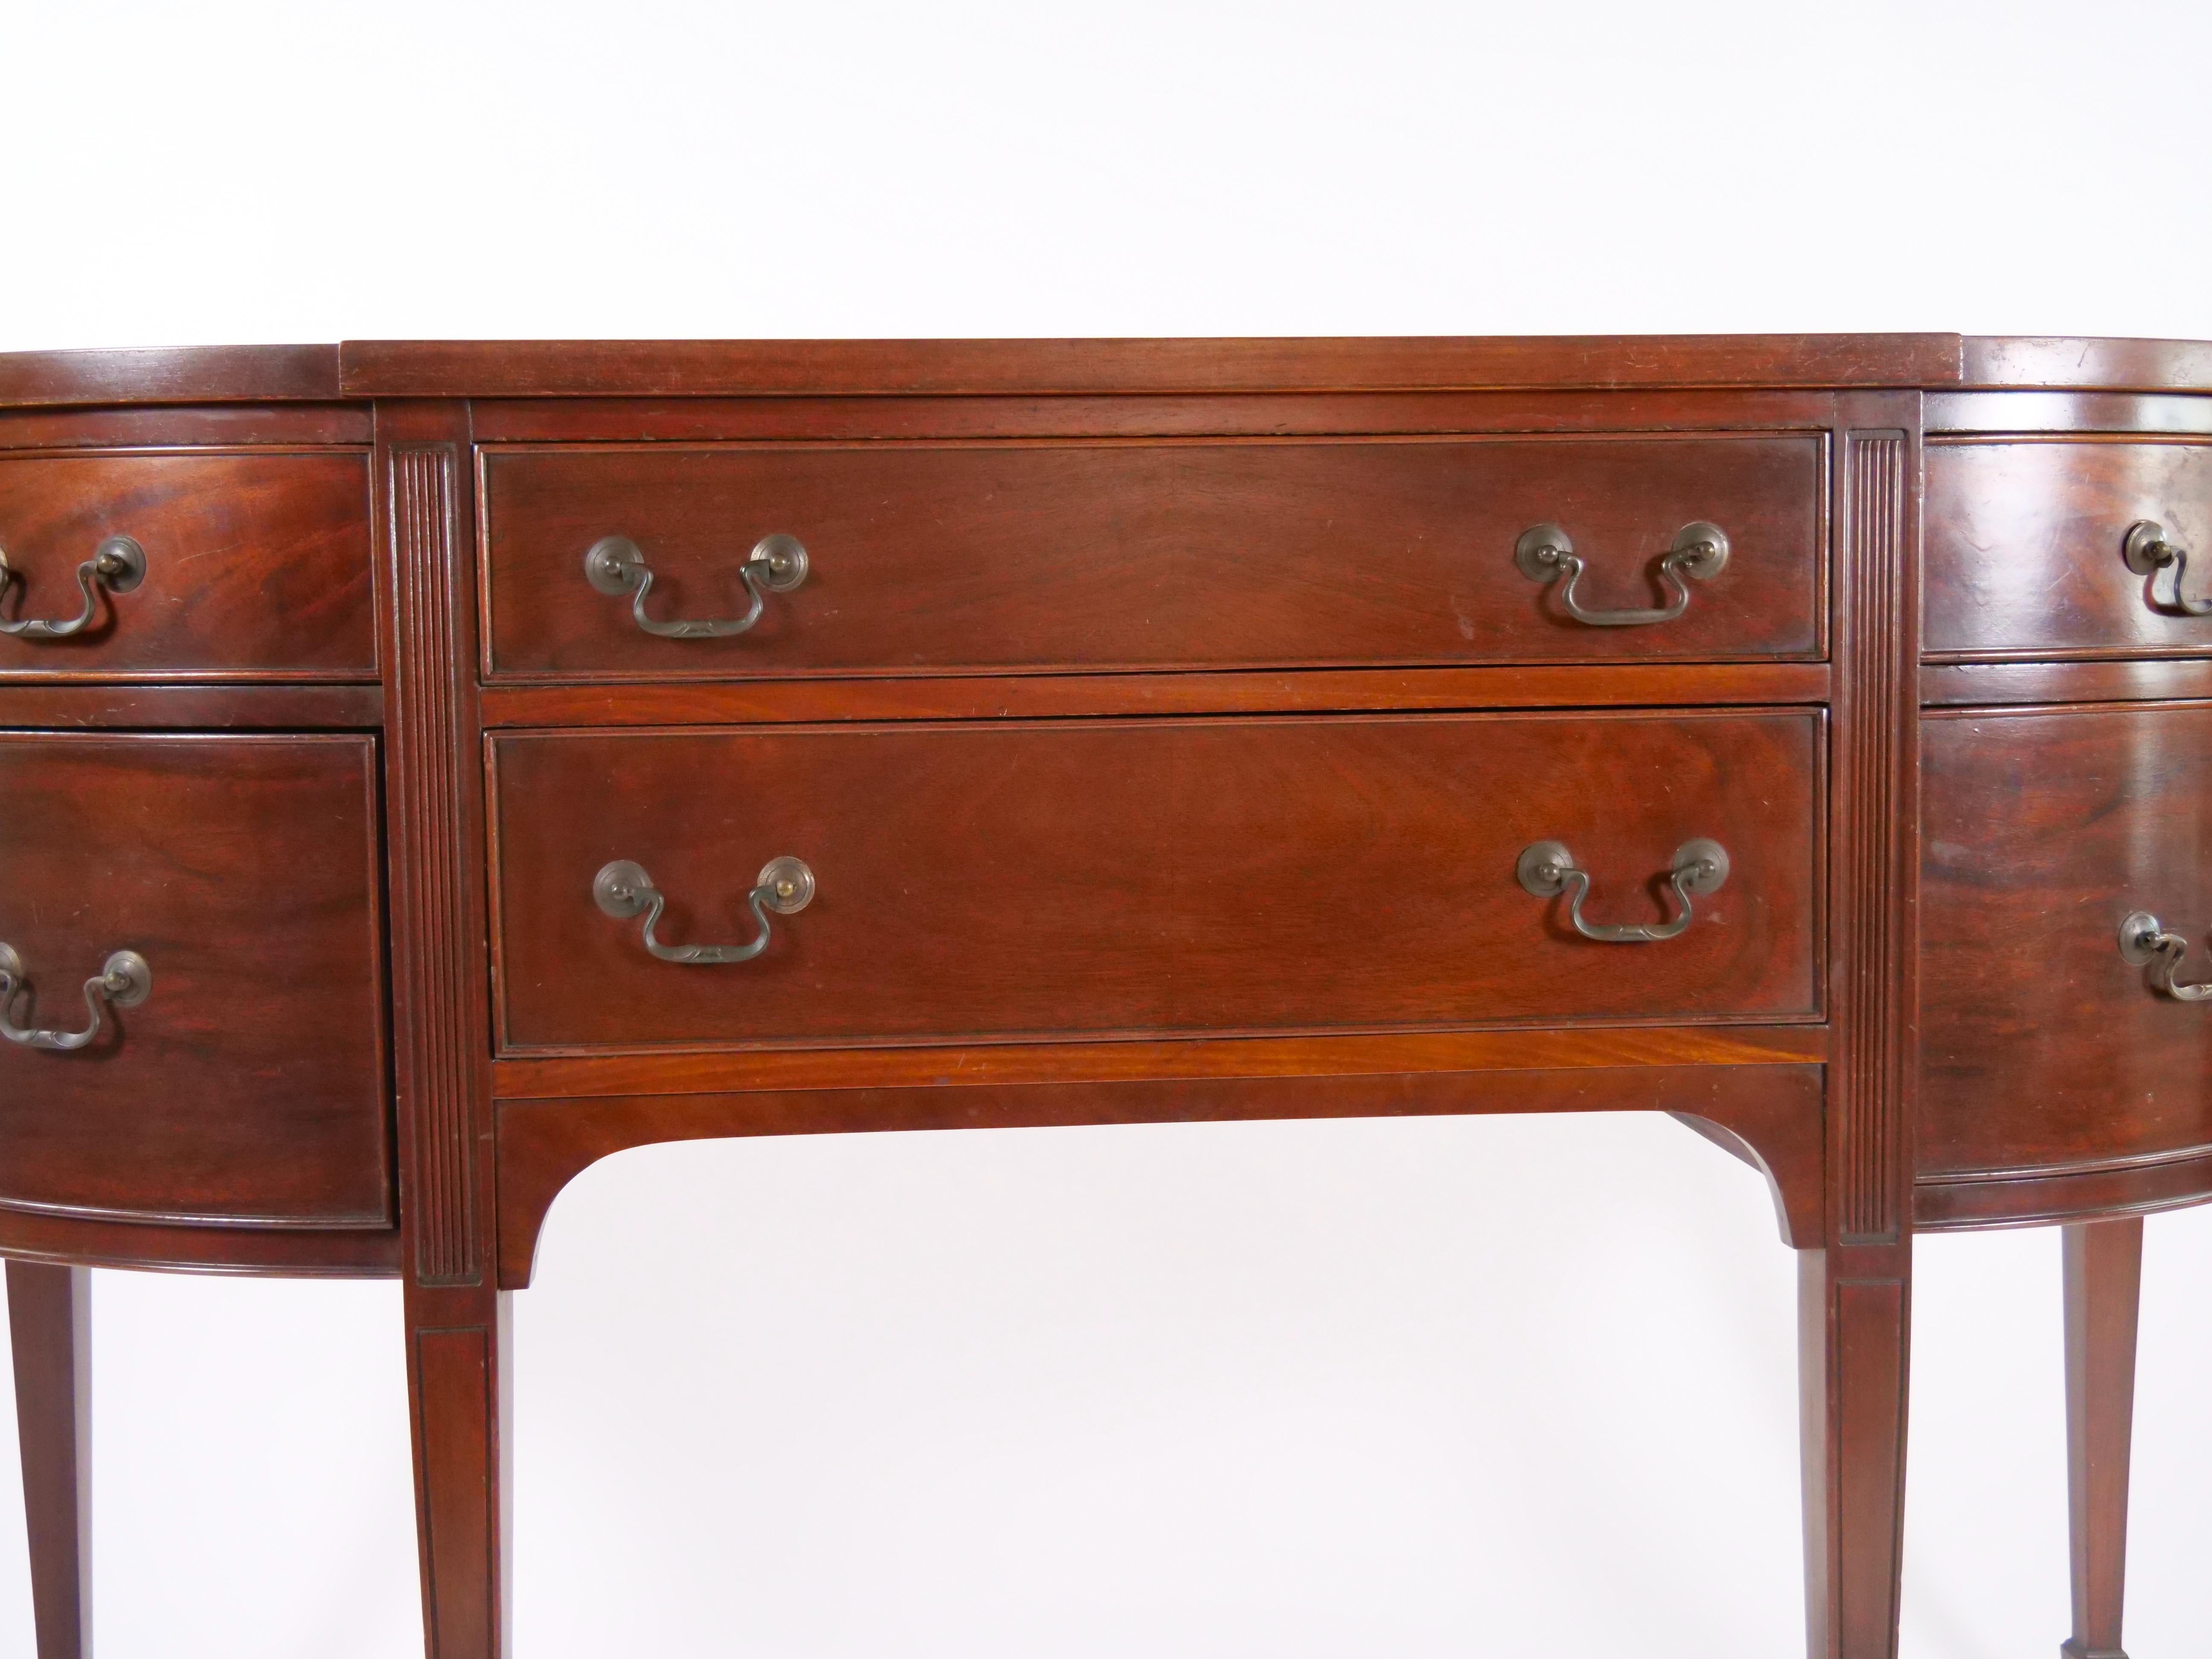 19th century Mahogany Wood Bow Front Buffet / Server  In Good Condition For Sale In Tarry Town, NY